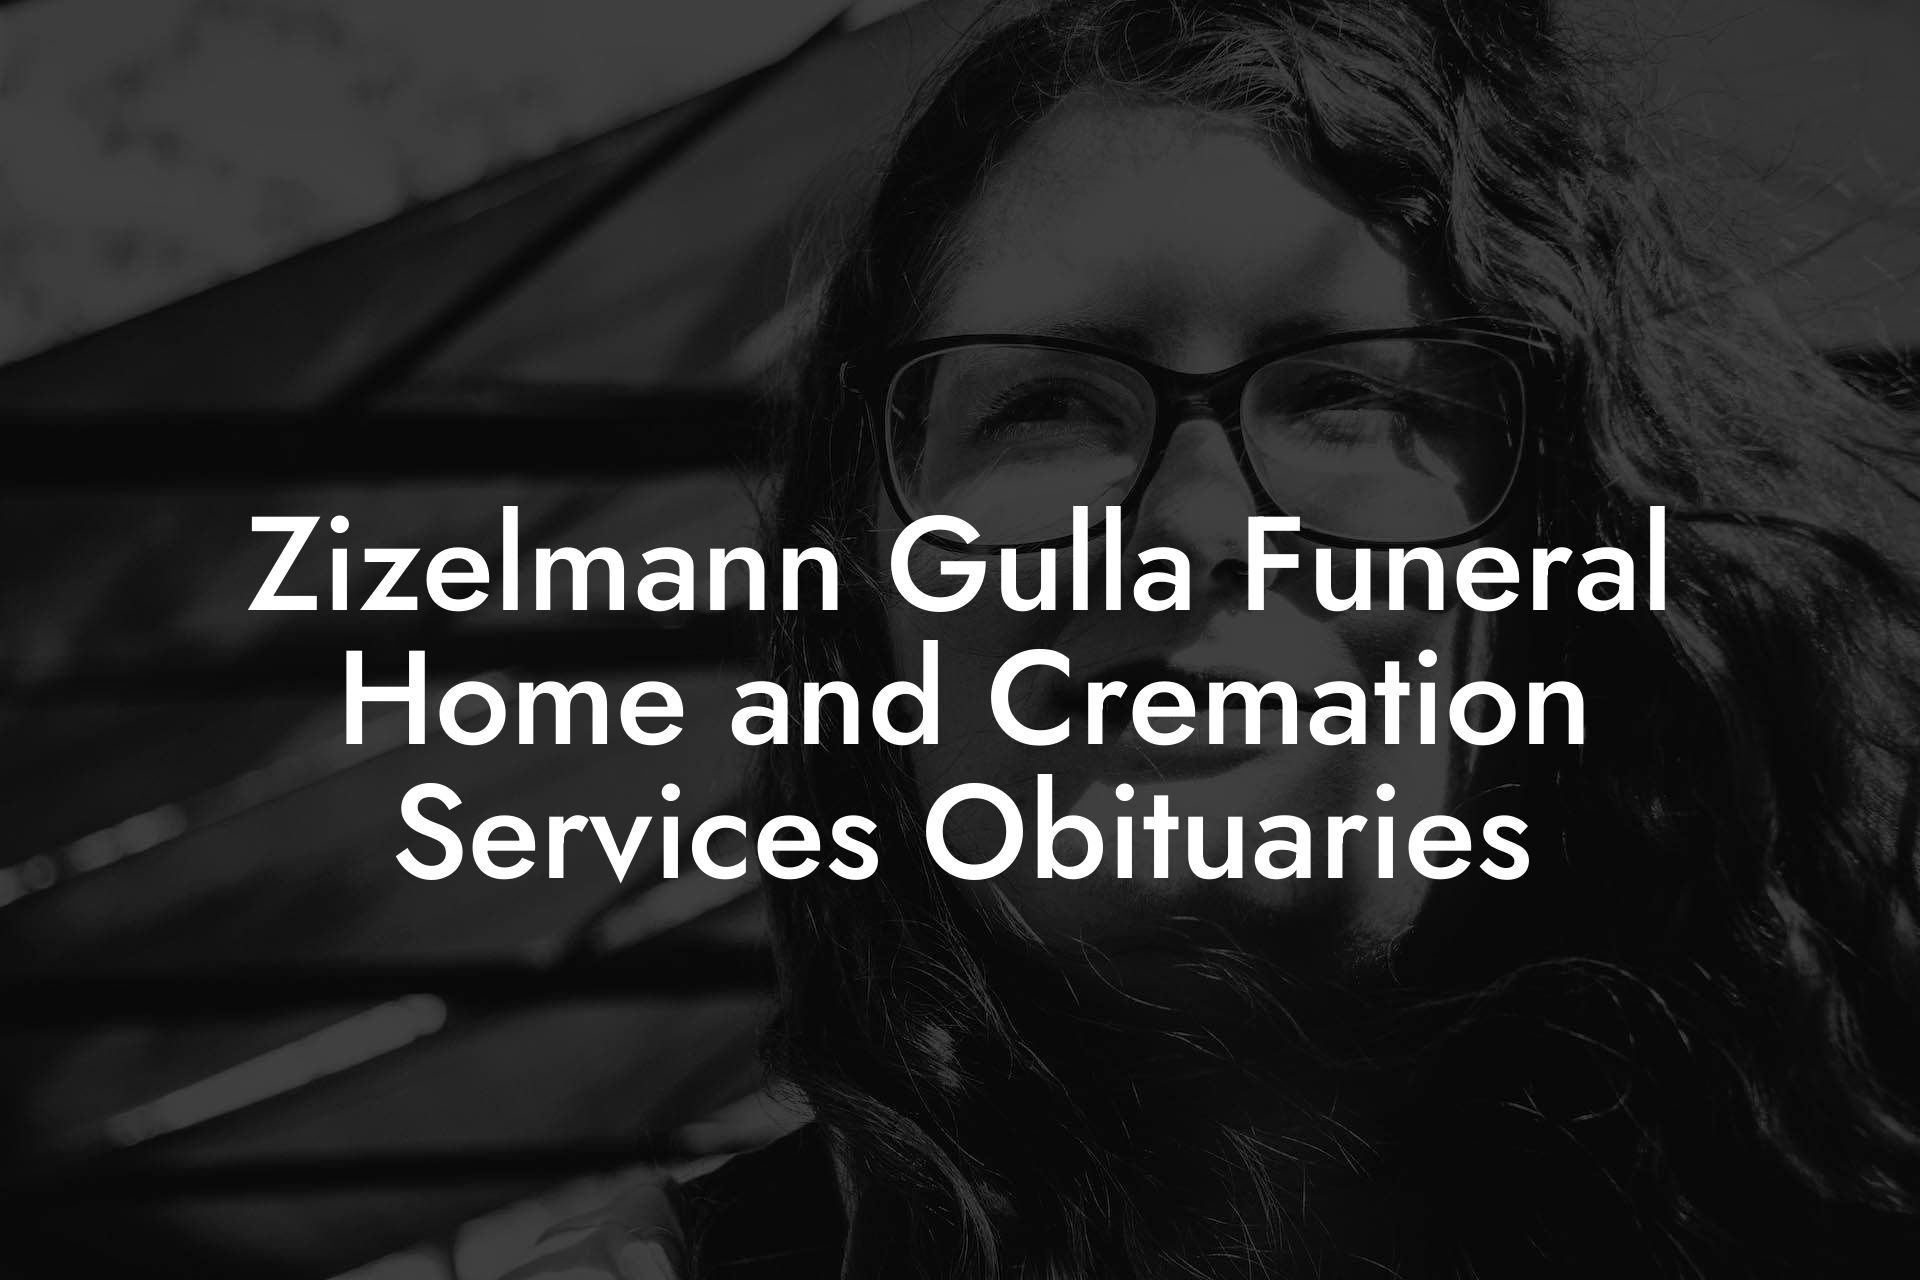 Zizelmann Gulla Funeral Home and Cremation Services Obituaries